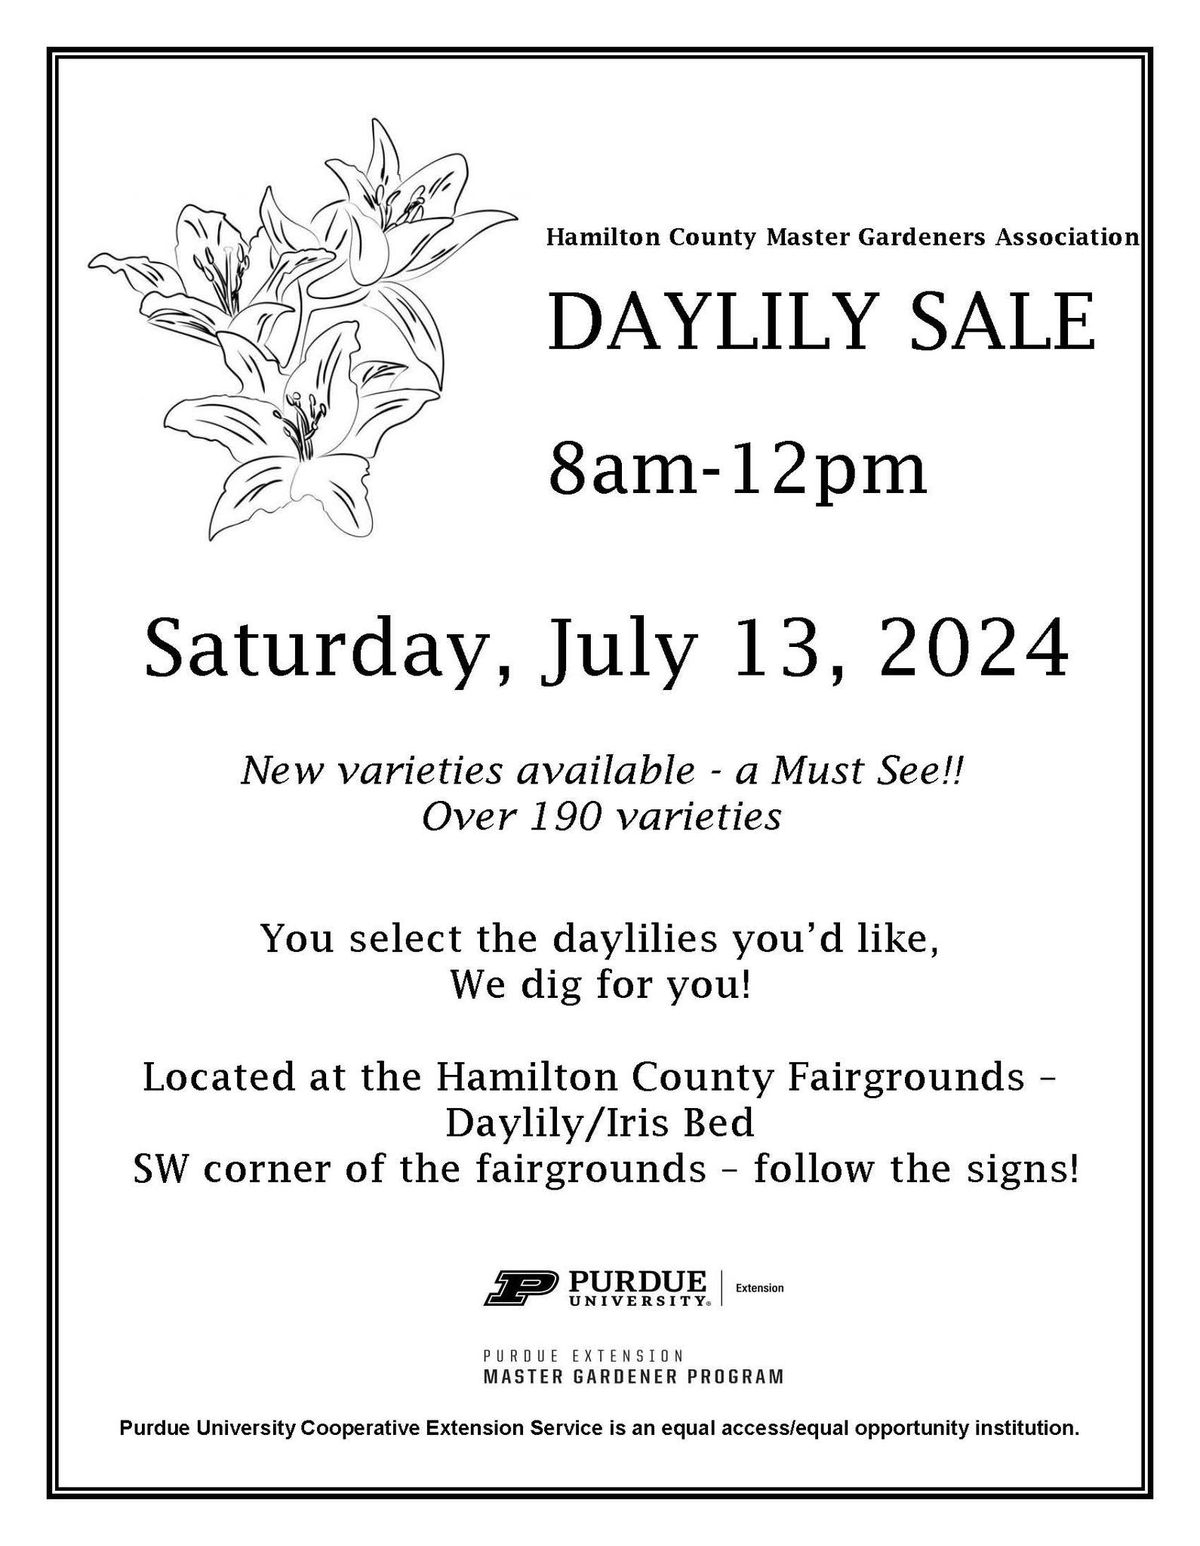 Daylily Sale presented by Hamilton County Master Gardeners Association